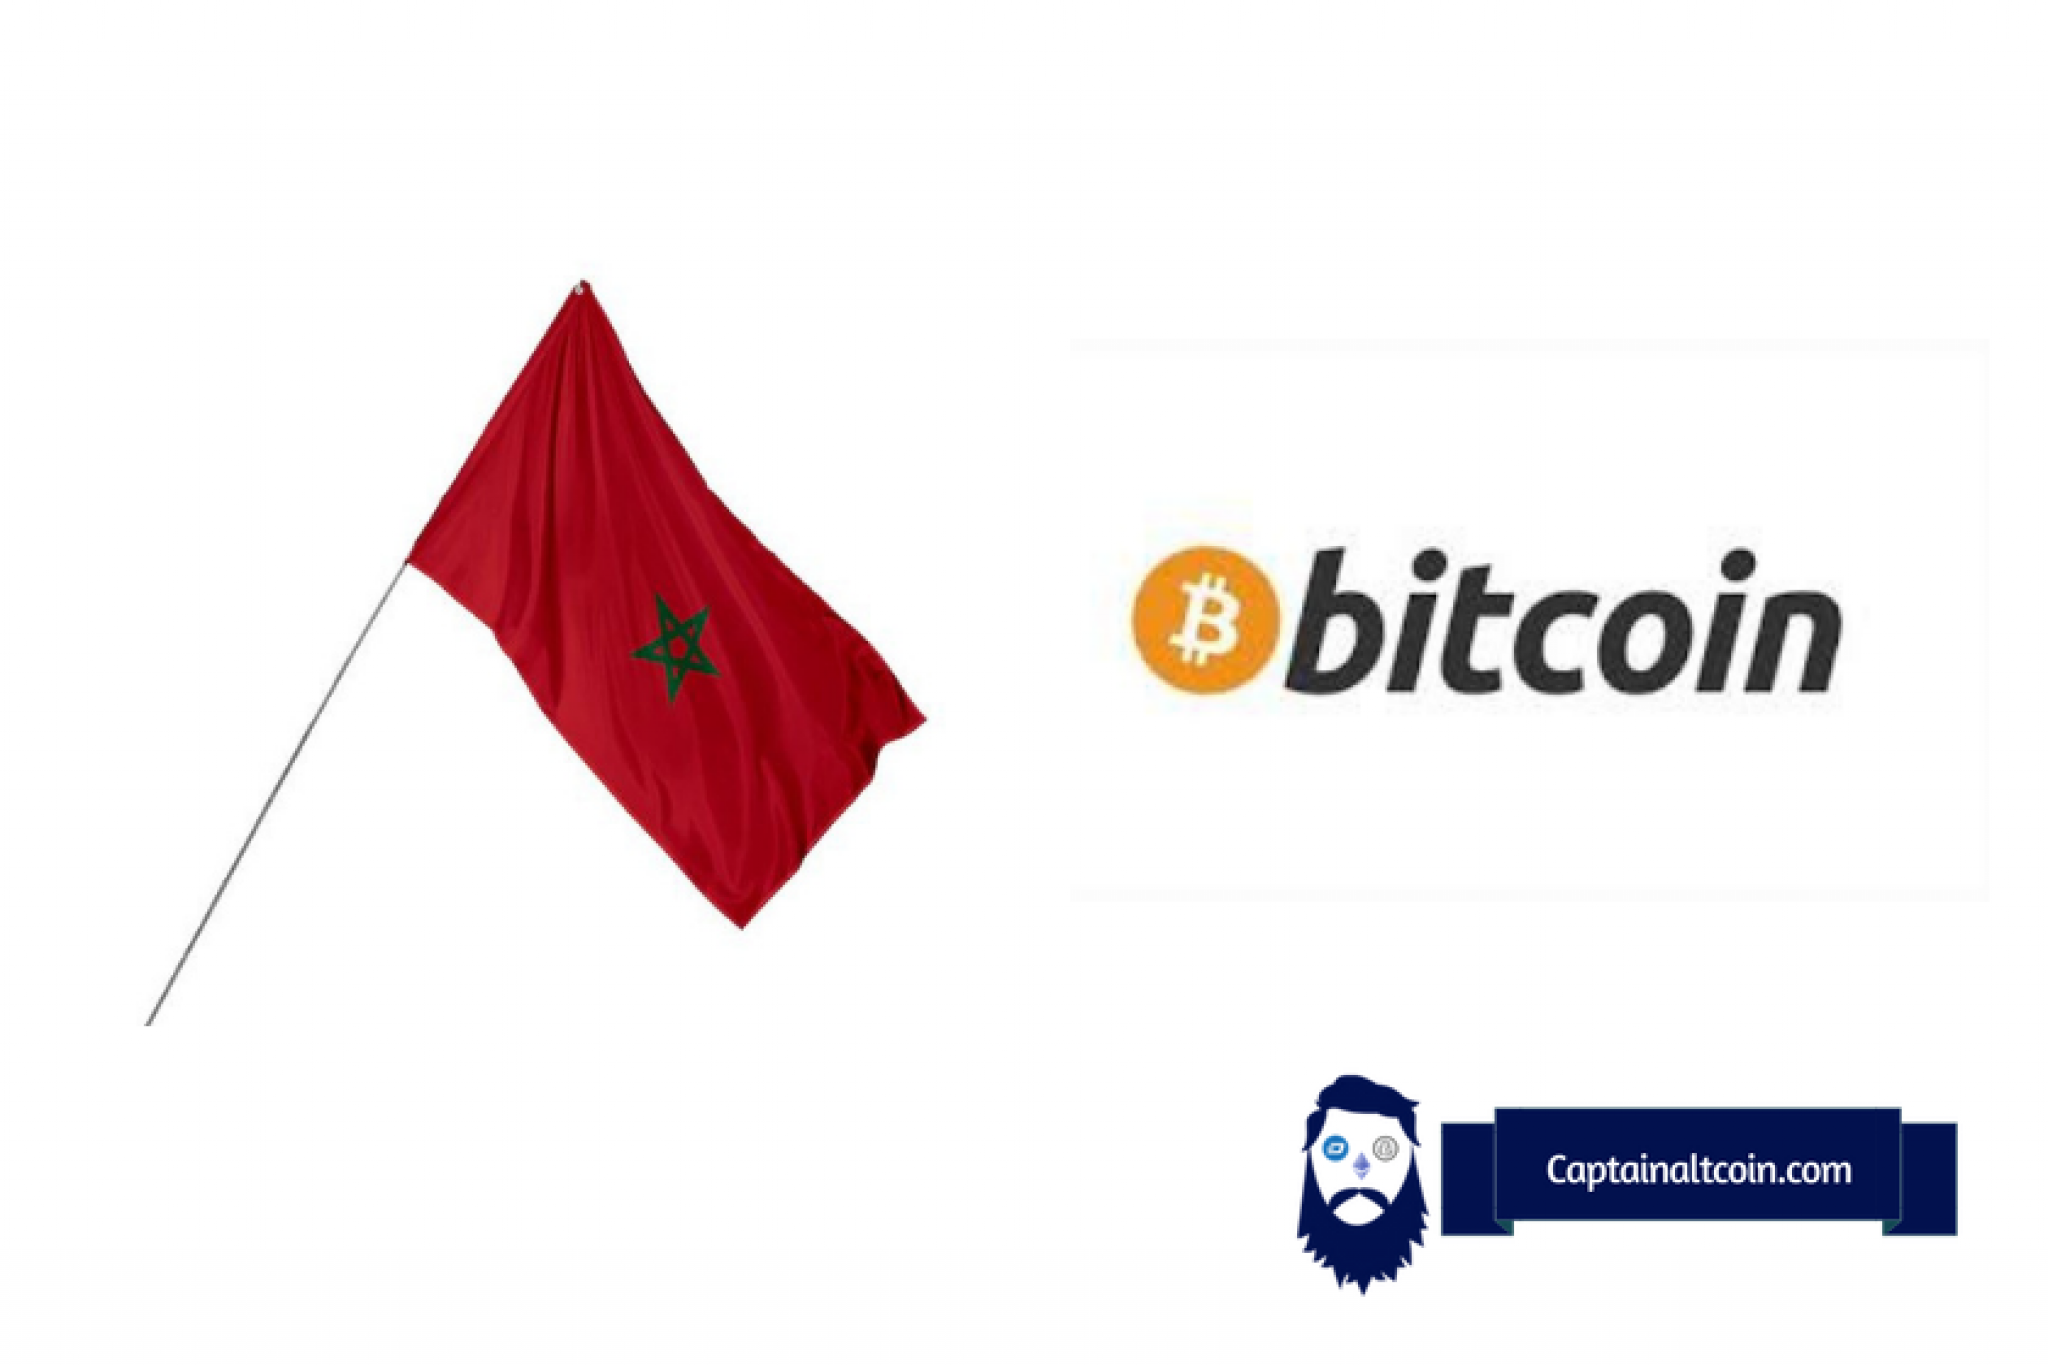 best place to buy bitcoin in morocco